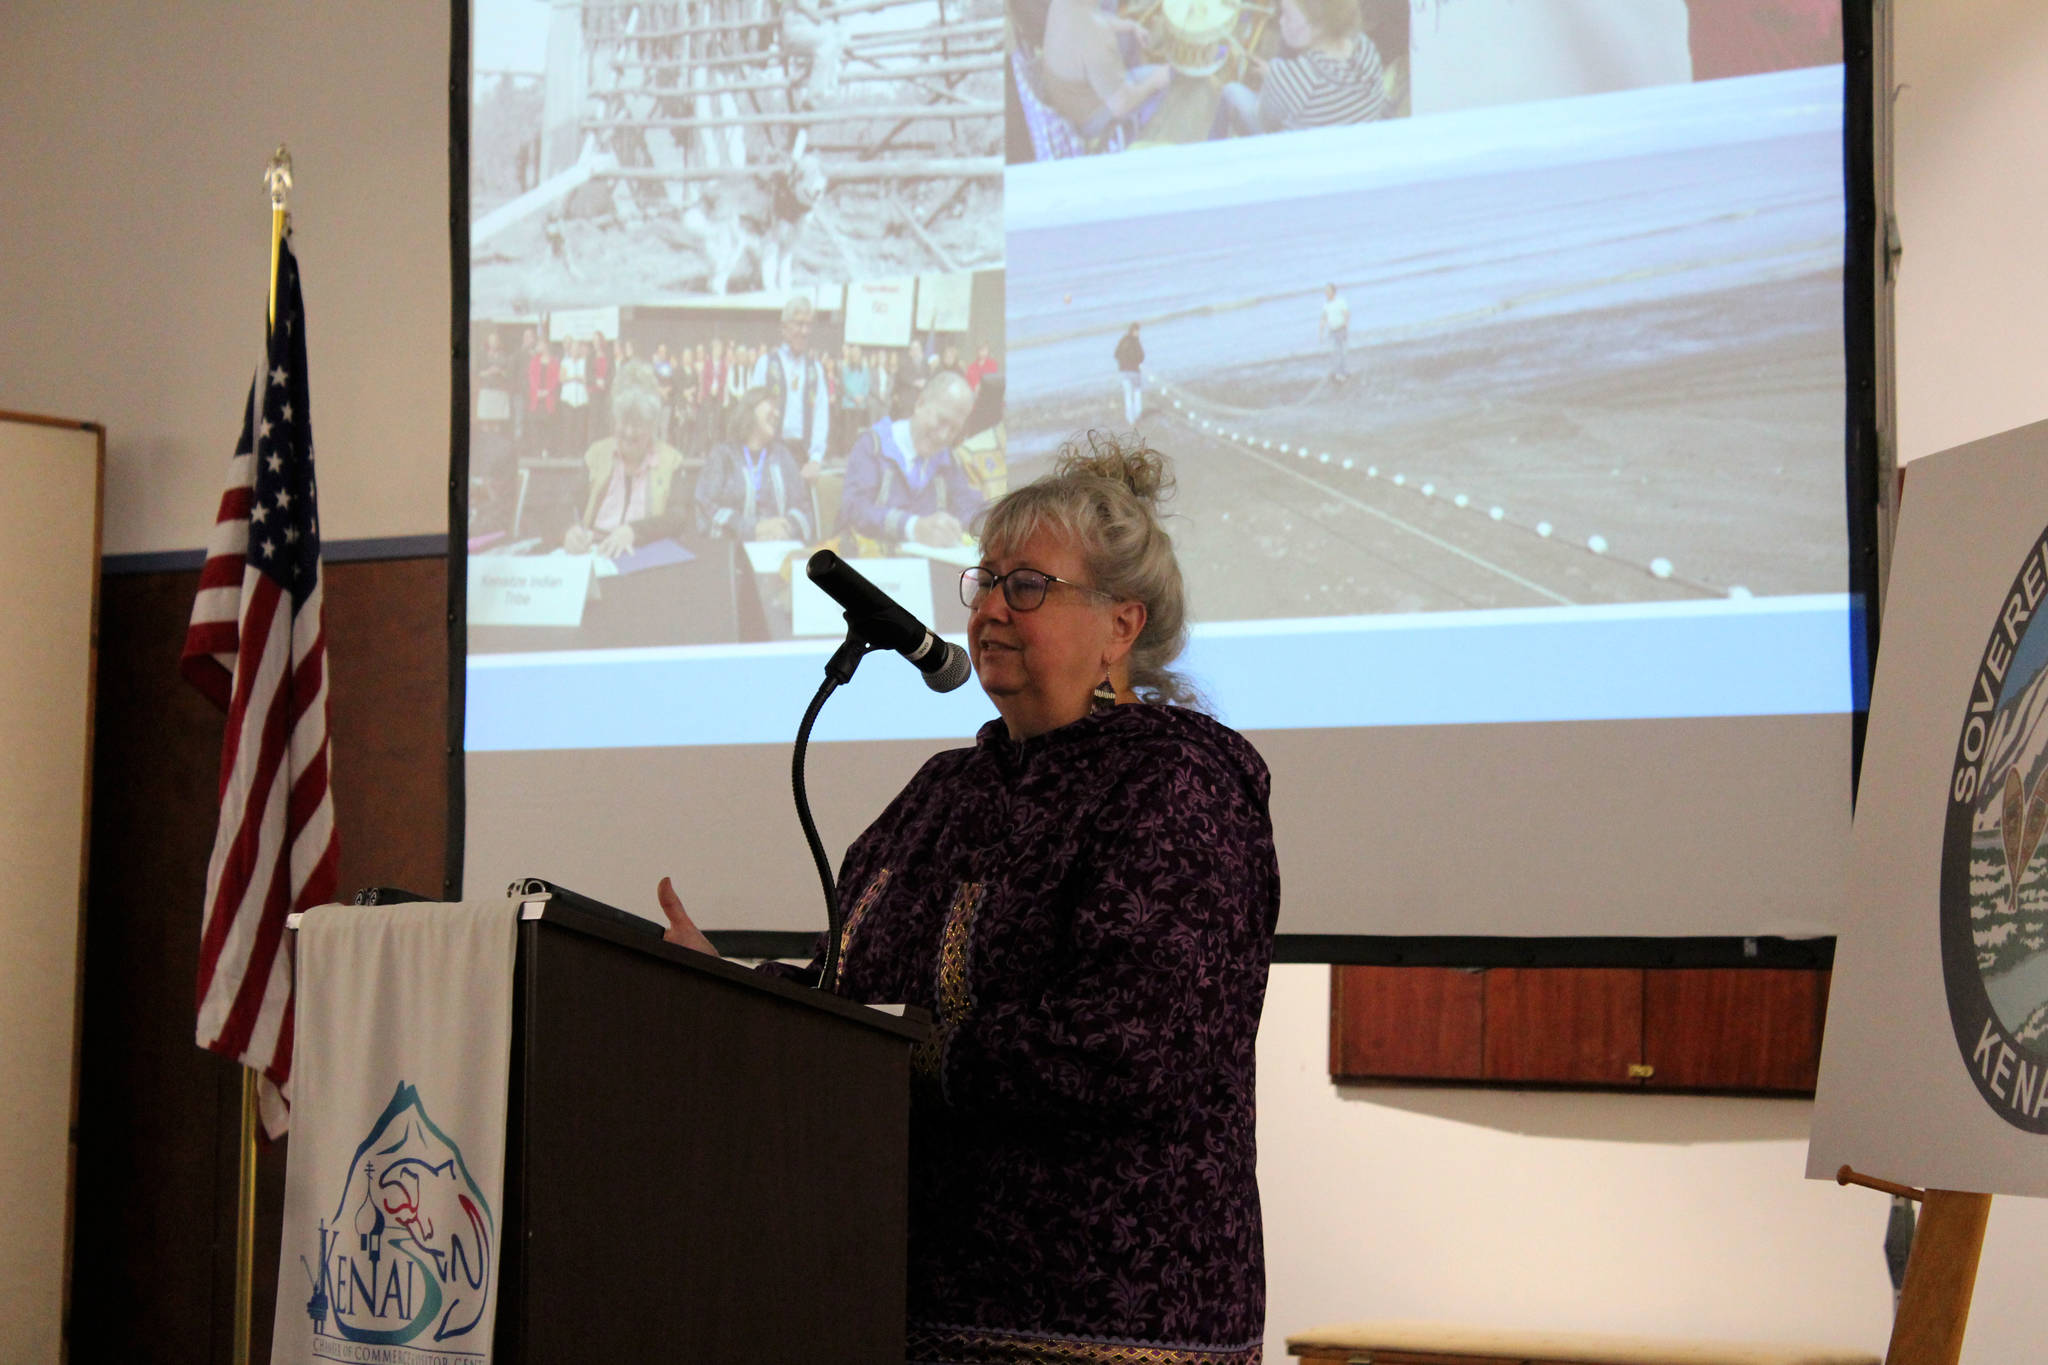 Barnadine Atchison speaks during a business luncheon at the Kenai Chamber of Commerce and Visitor Center on Wednesday, July 7, 2021 in Kenai, Alaska. (Ashlyn O’Hara/Peninsula Clarion)